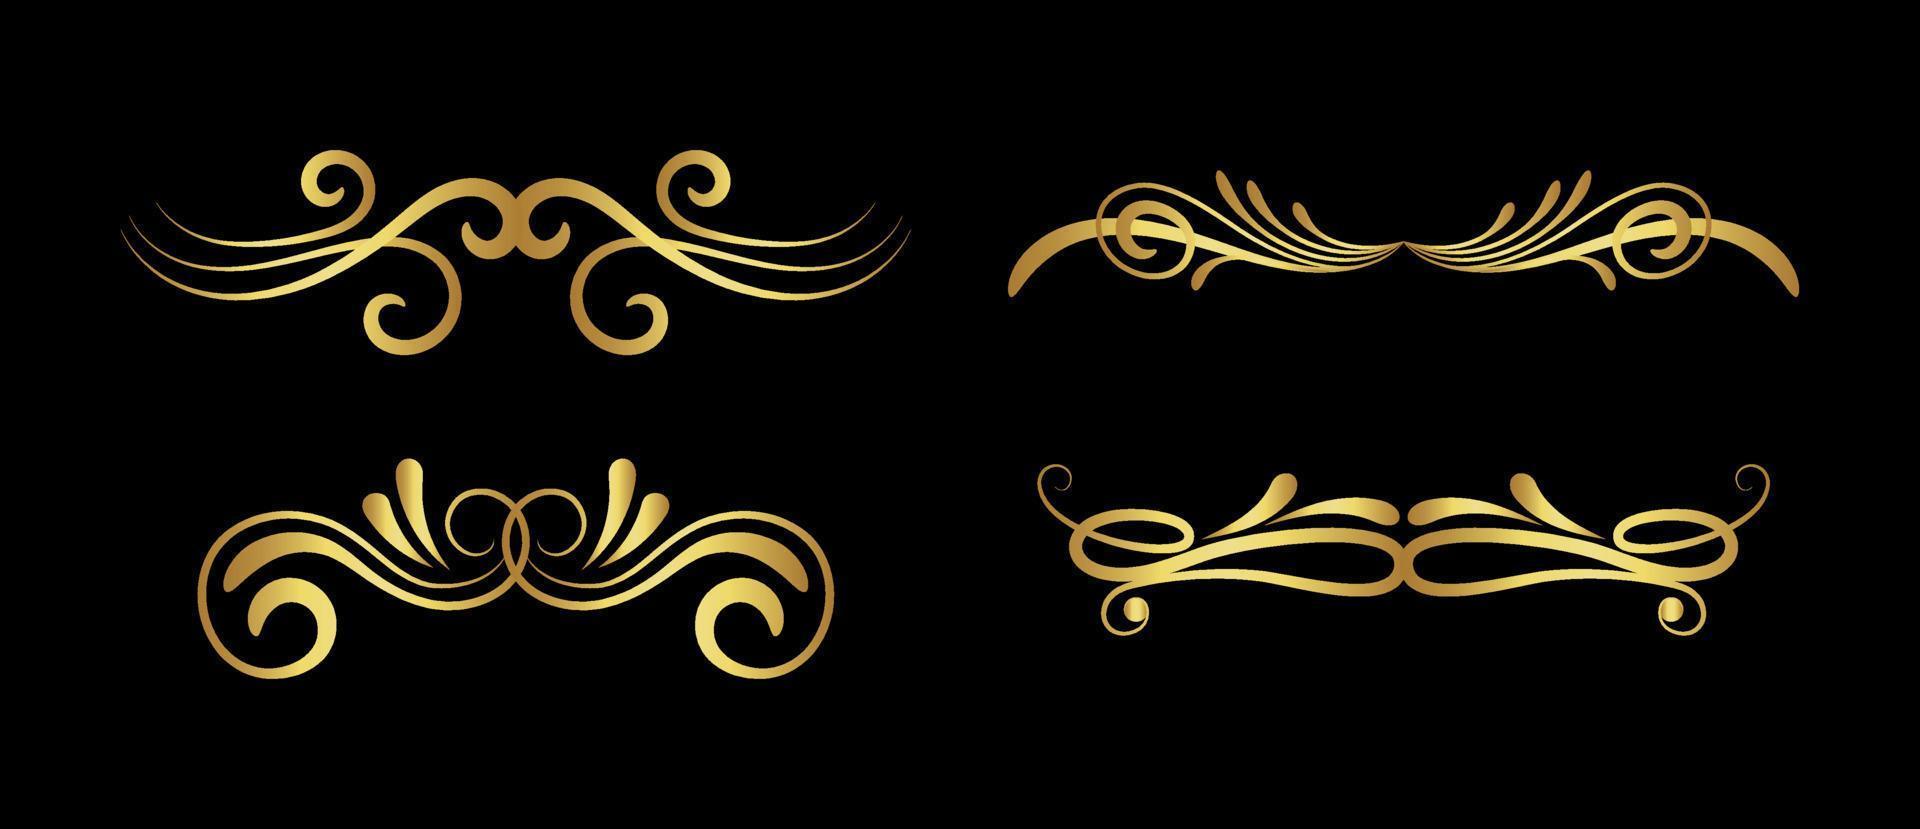 Set of golden dividers and text separators. Lines and vines for page decoration. Cute doodle ornate design elements vector